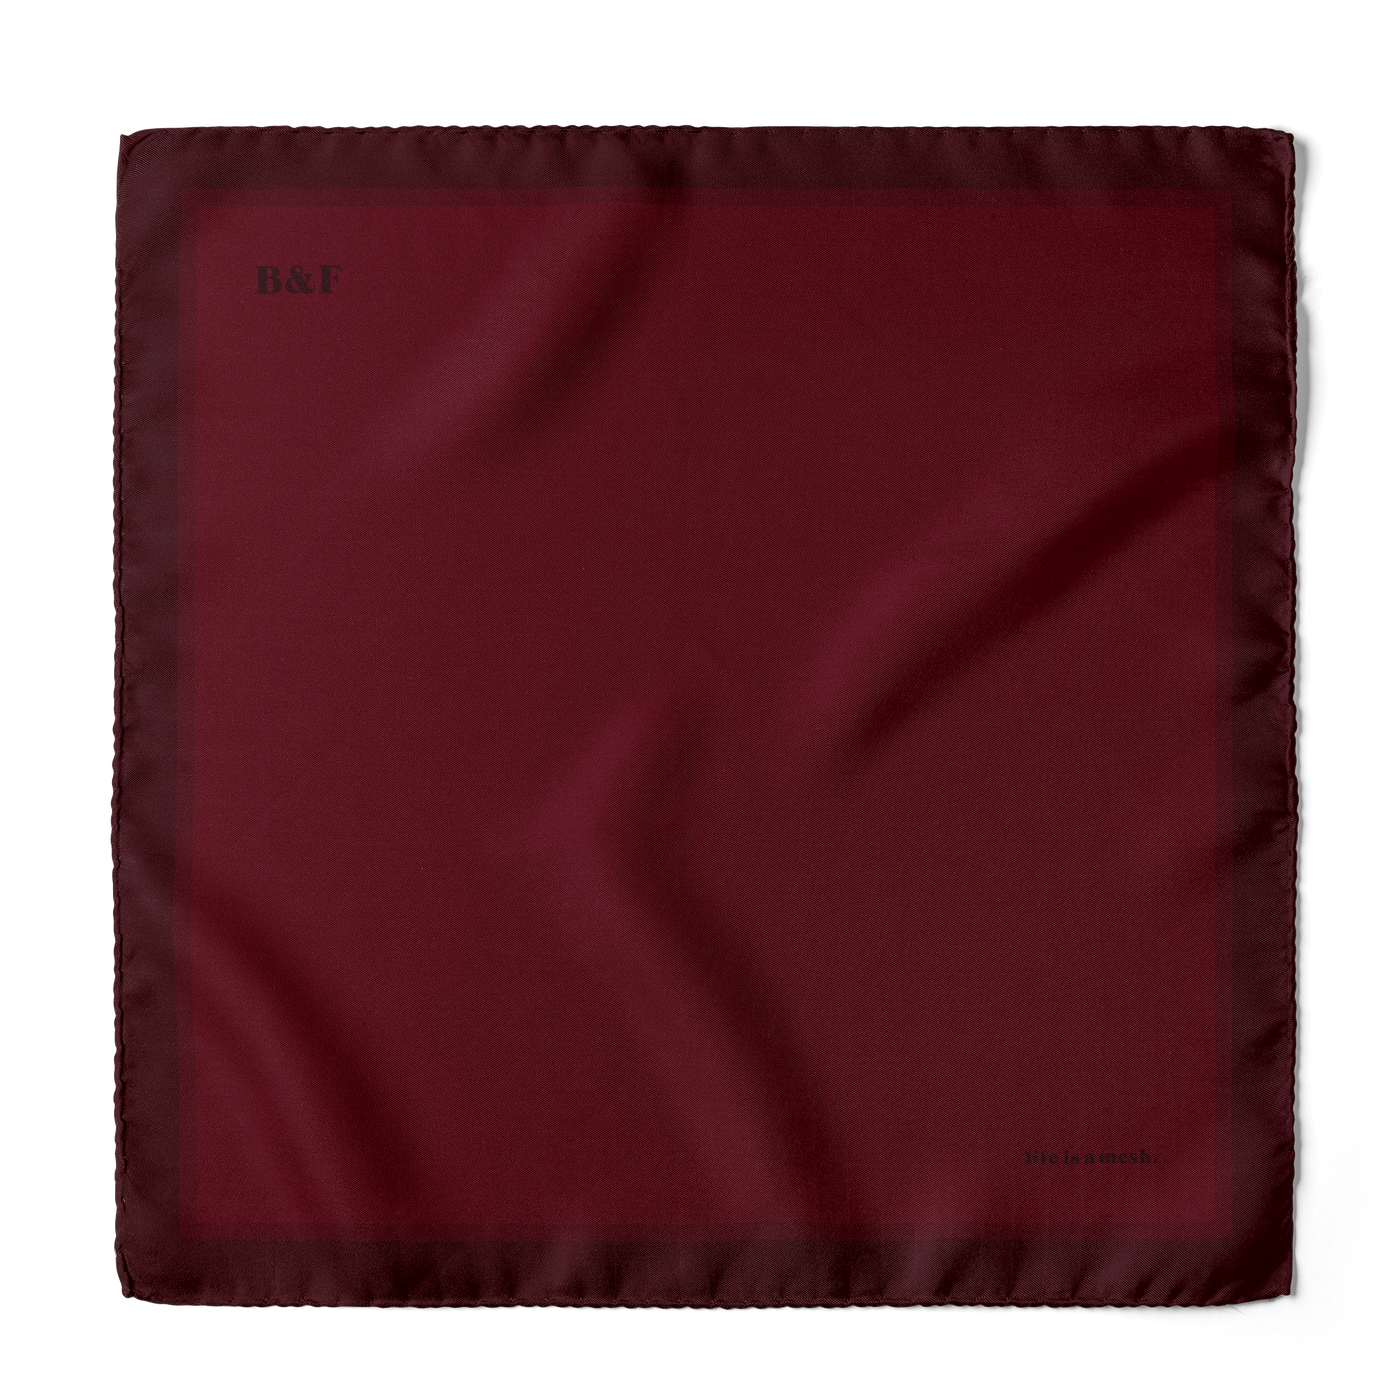 Bordeaux Pocket Square (Custom up to 3 Letters)